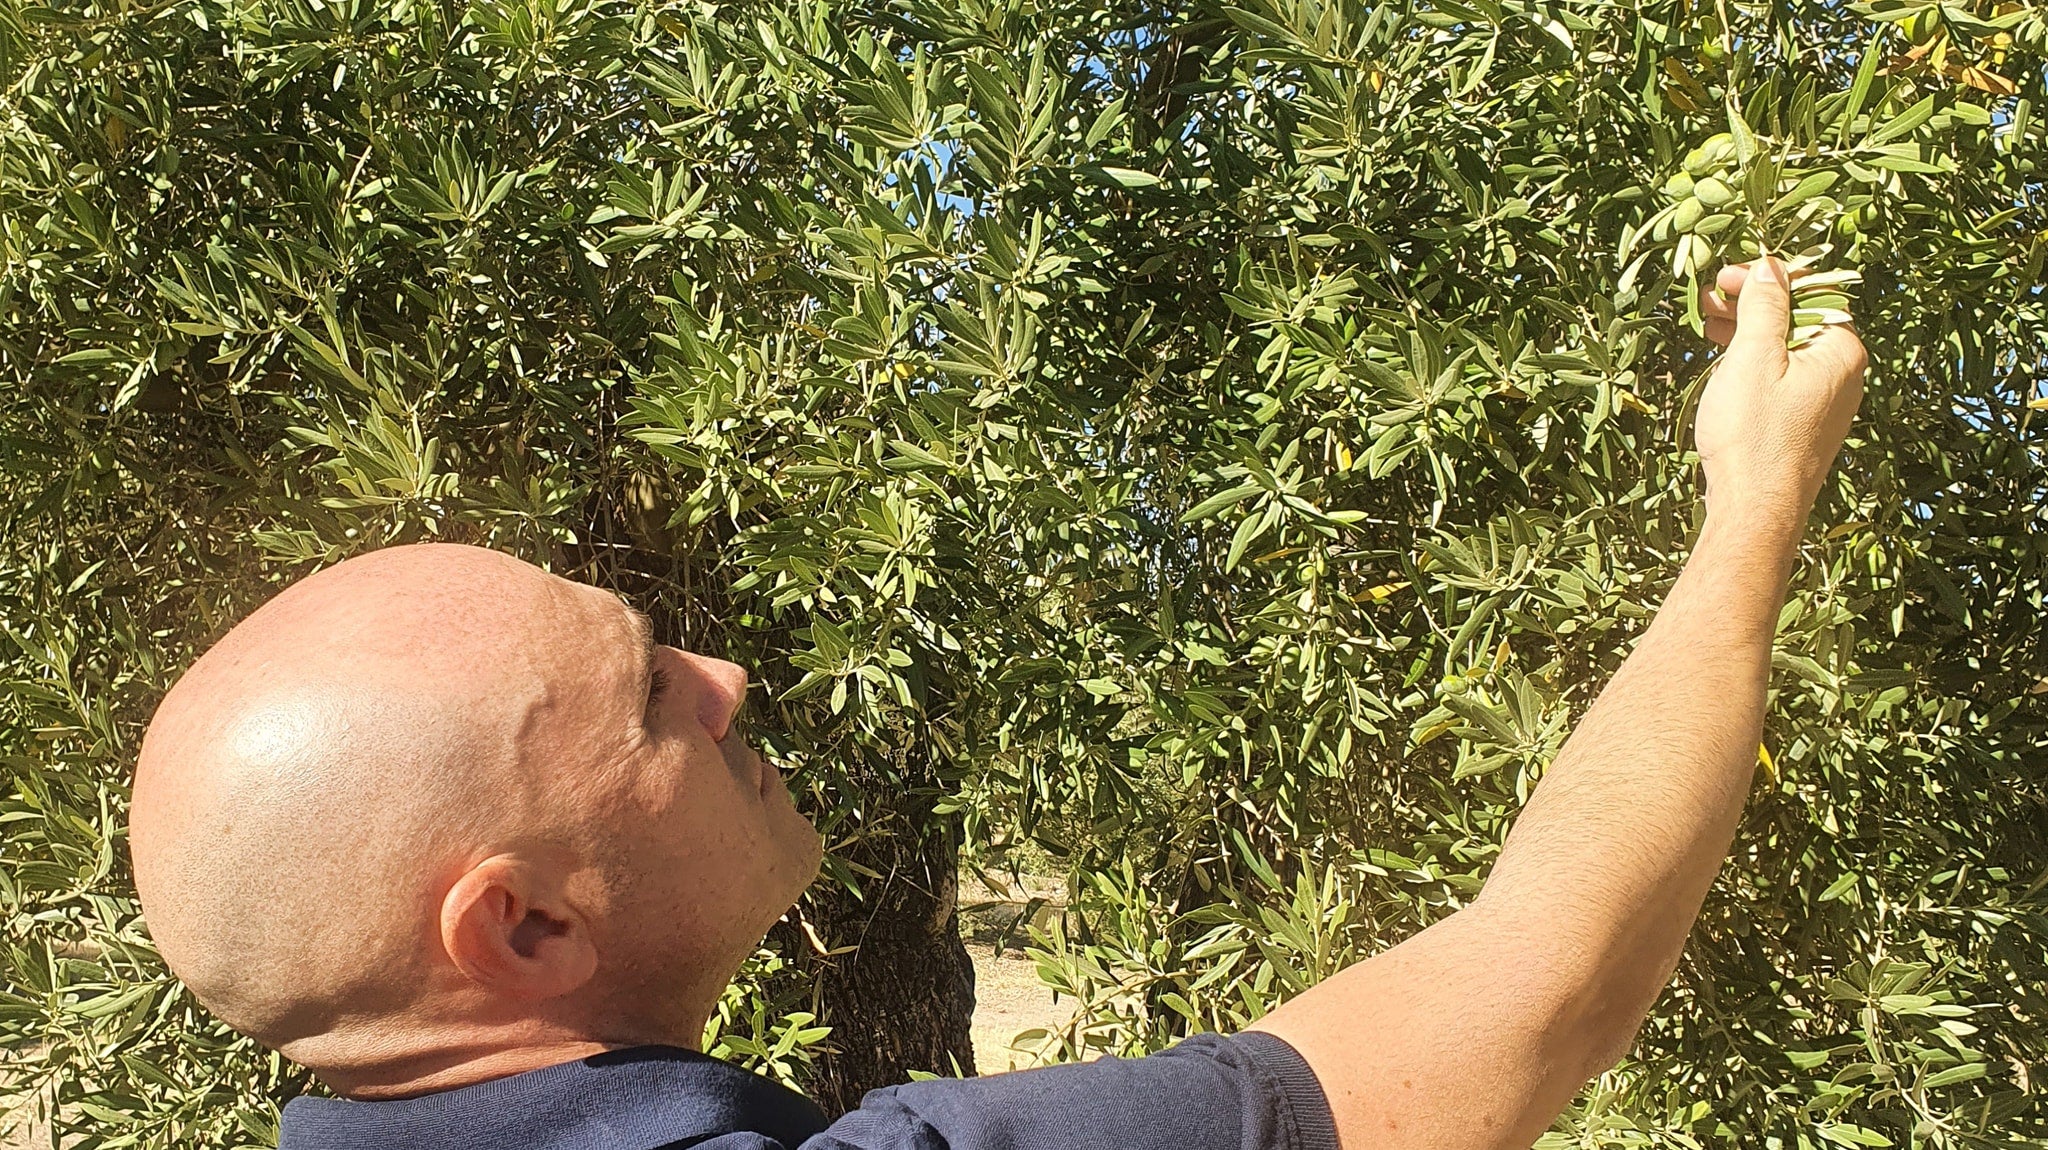 Olive oil grove of Oro Bailen, one of the best Spanish olive oil producers